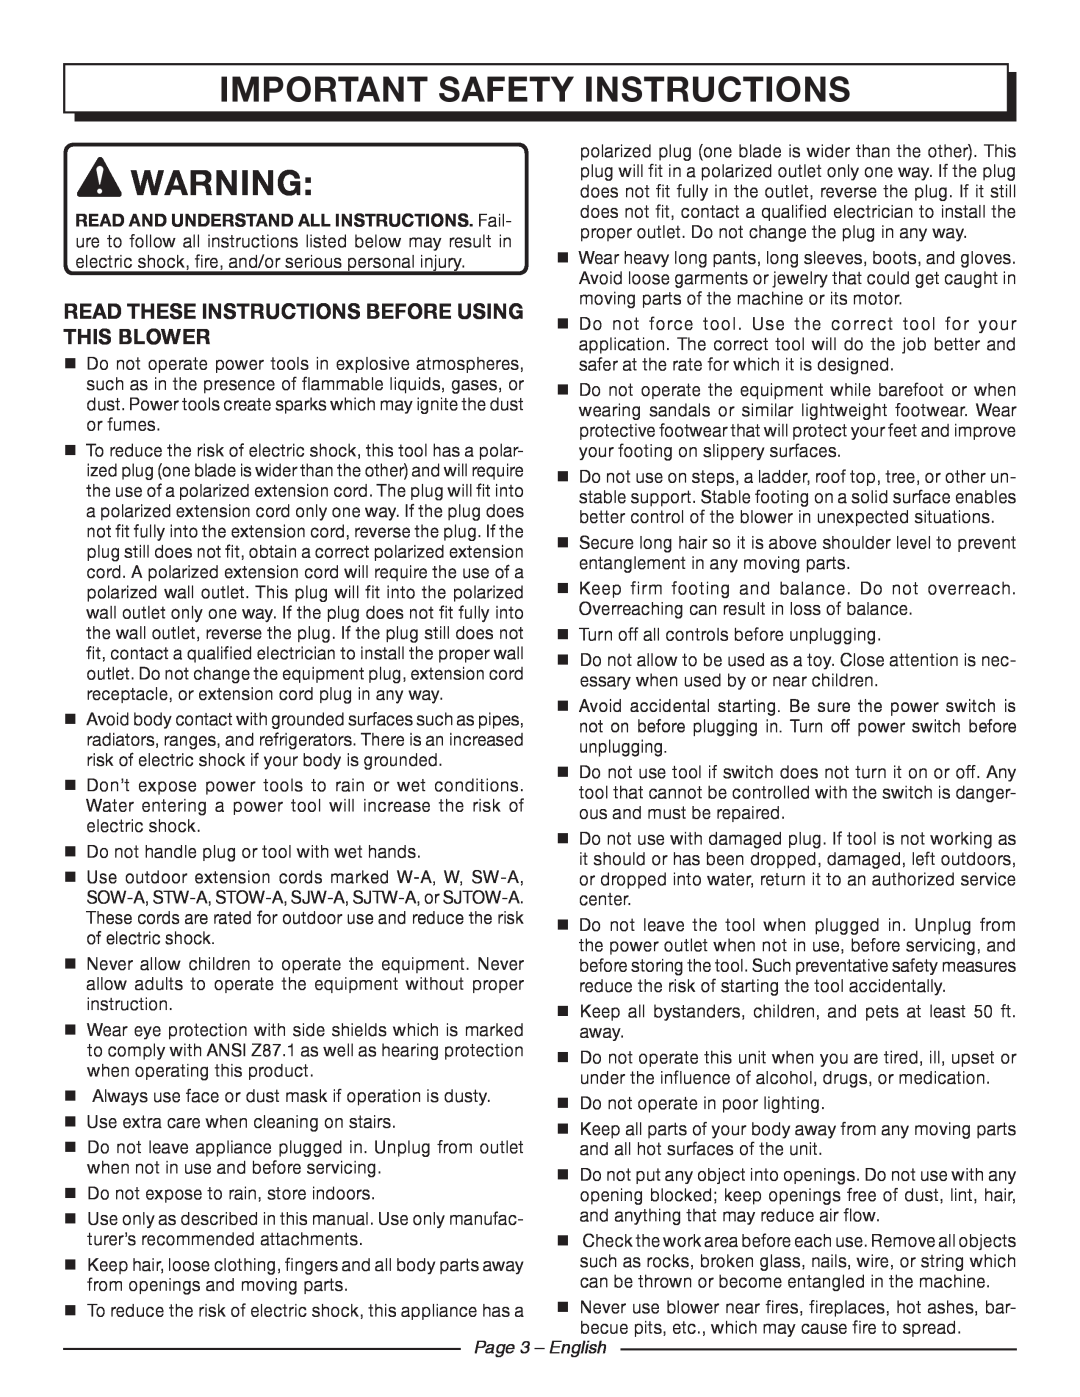 Homelite UT42100 important safety instructions, READ THESE INSTRUCTIONS before using, this blower, Page 3 - English 